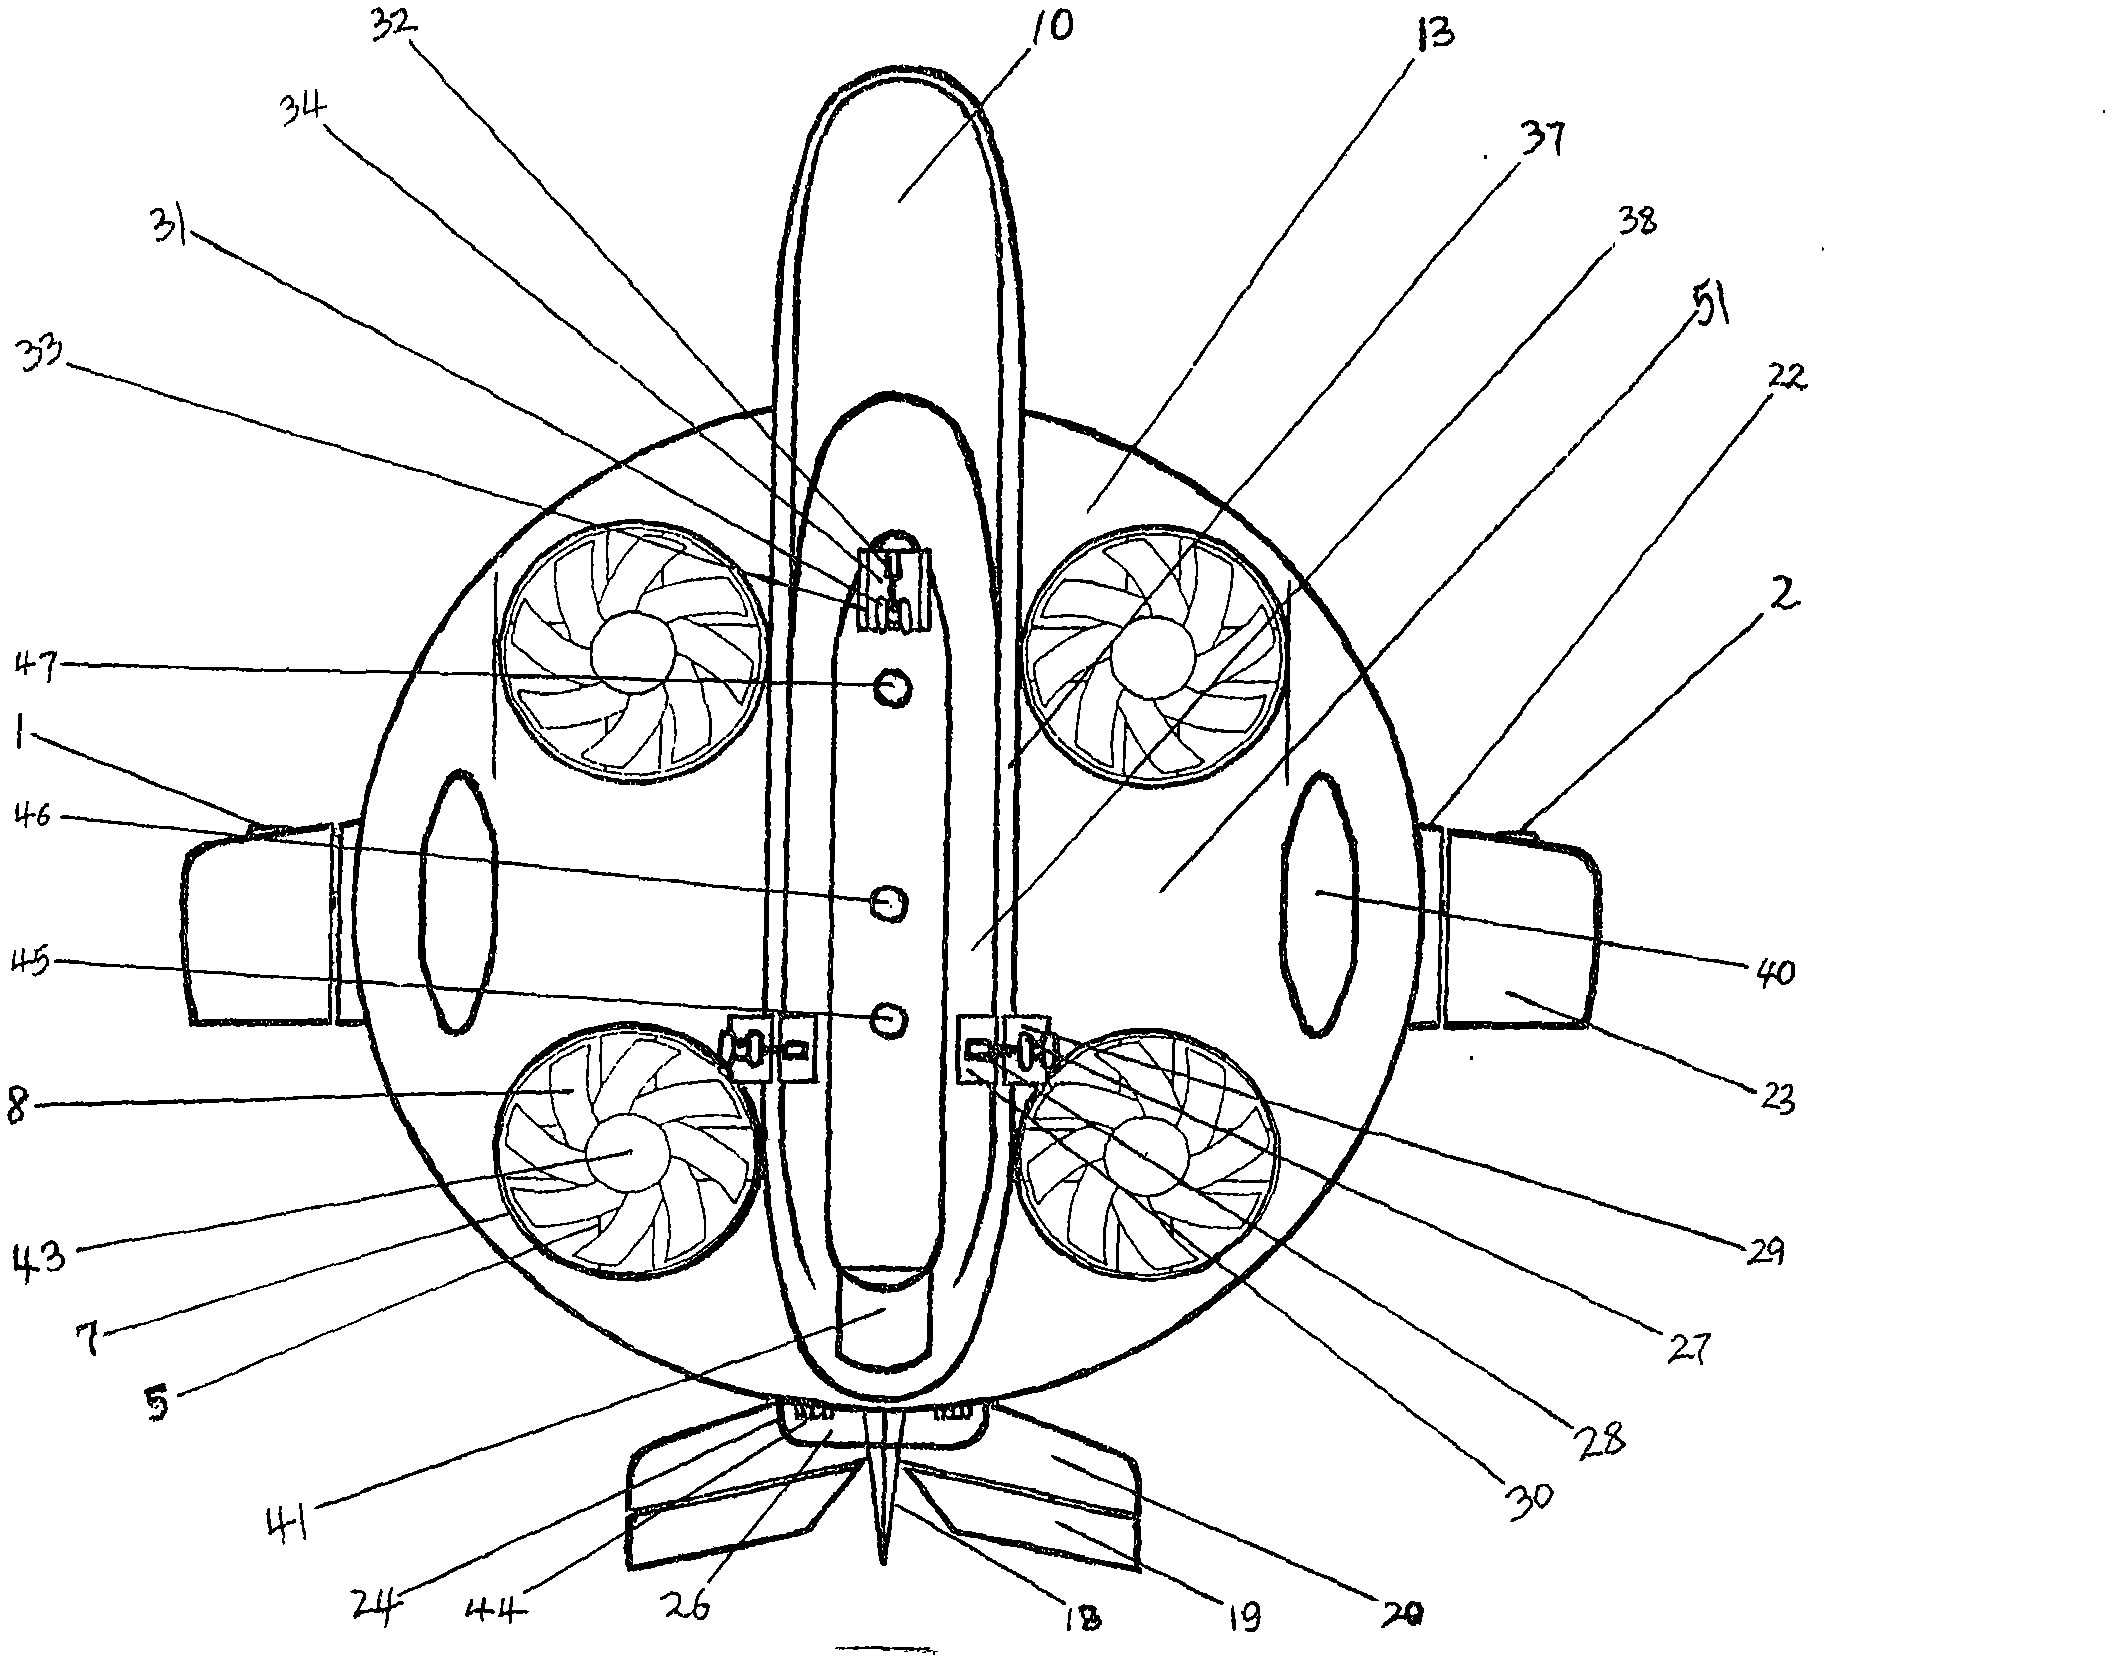 Design method for multifunctional helicopter